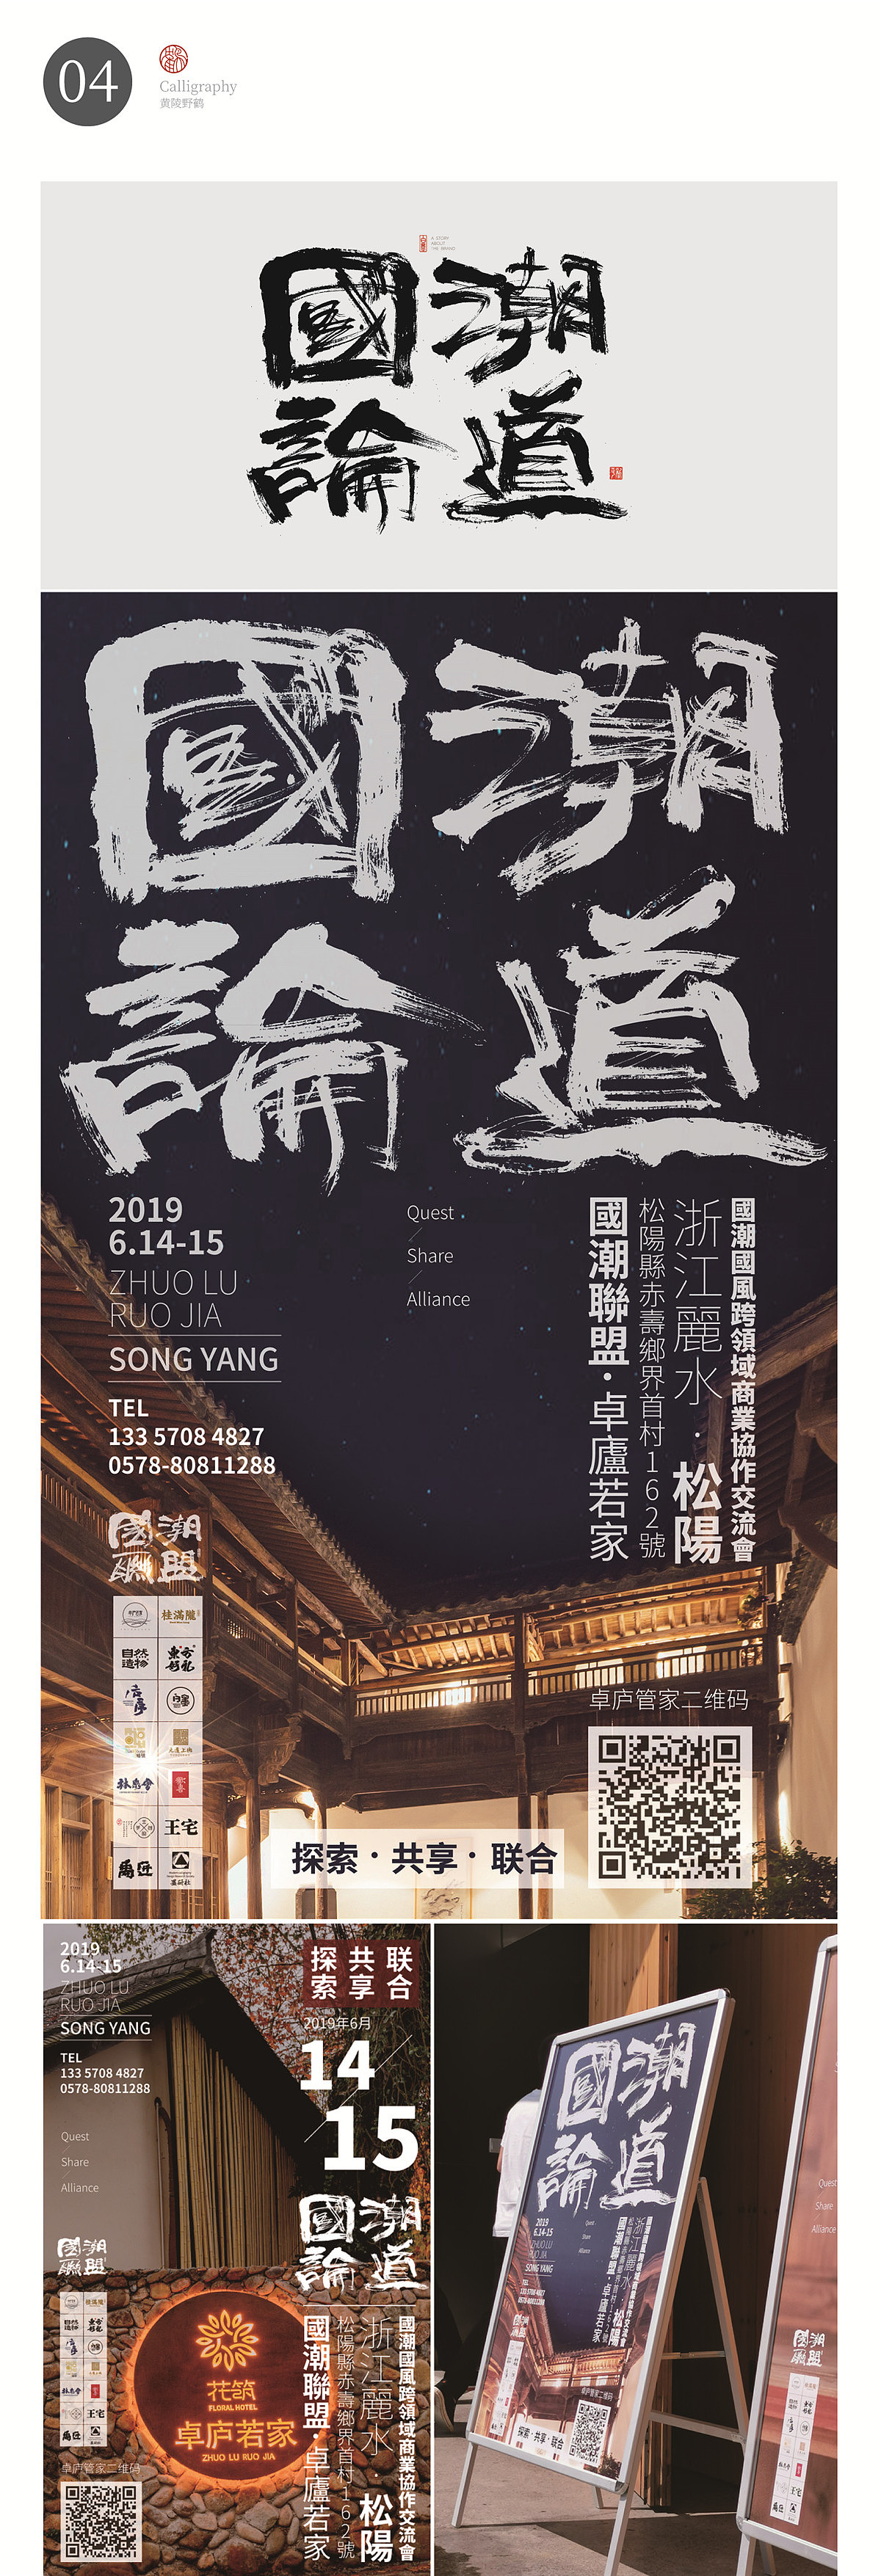 Calligraphy Font Design-Bai Mo-Huang Ling Ye He-Arrangement of Commercial Calligraphy Works